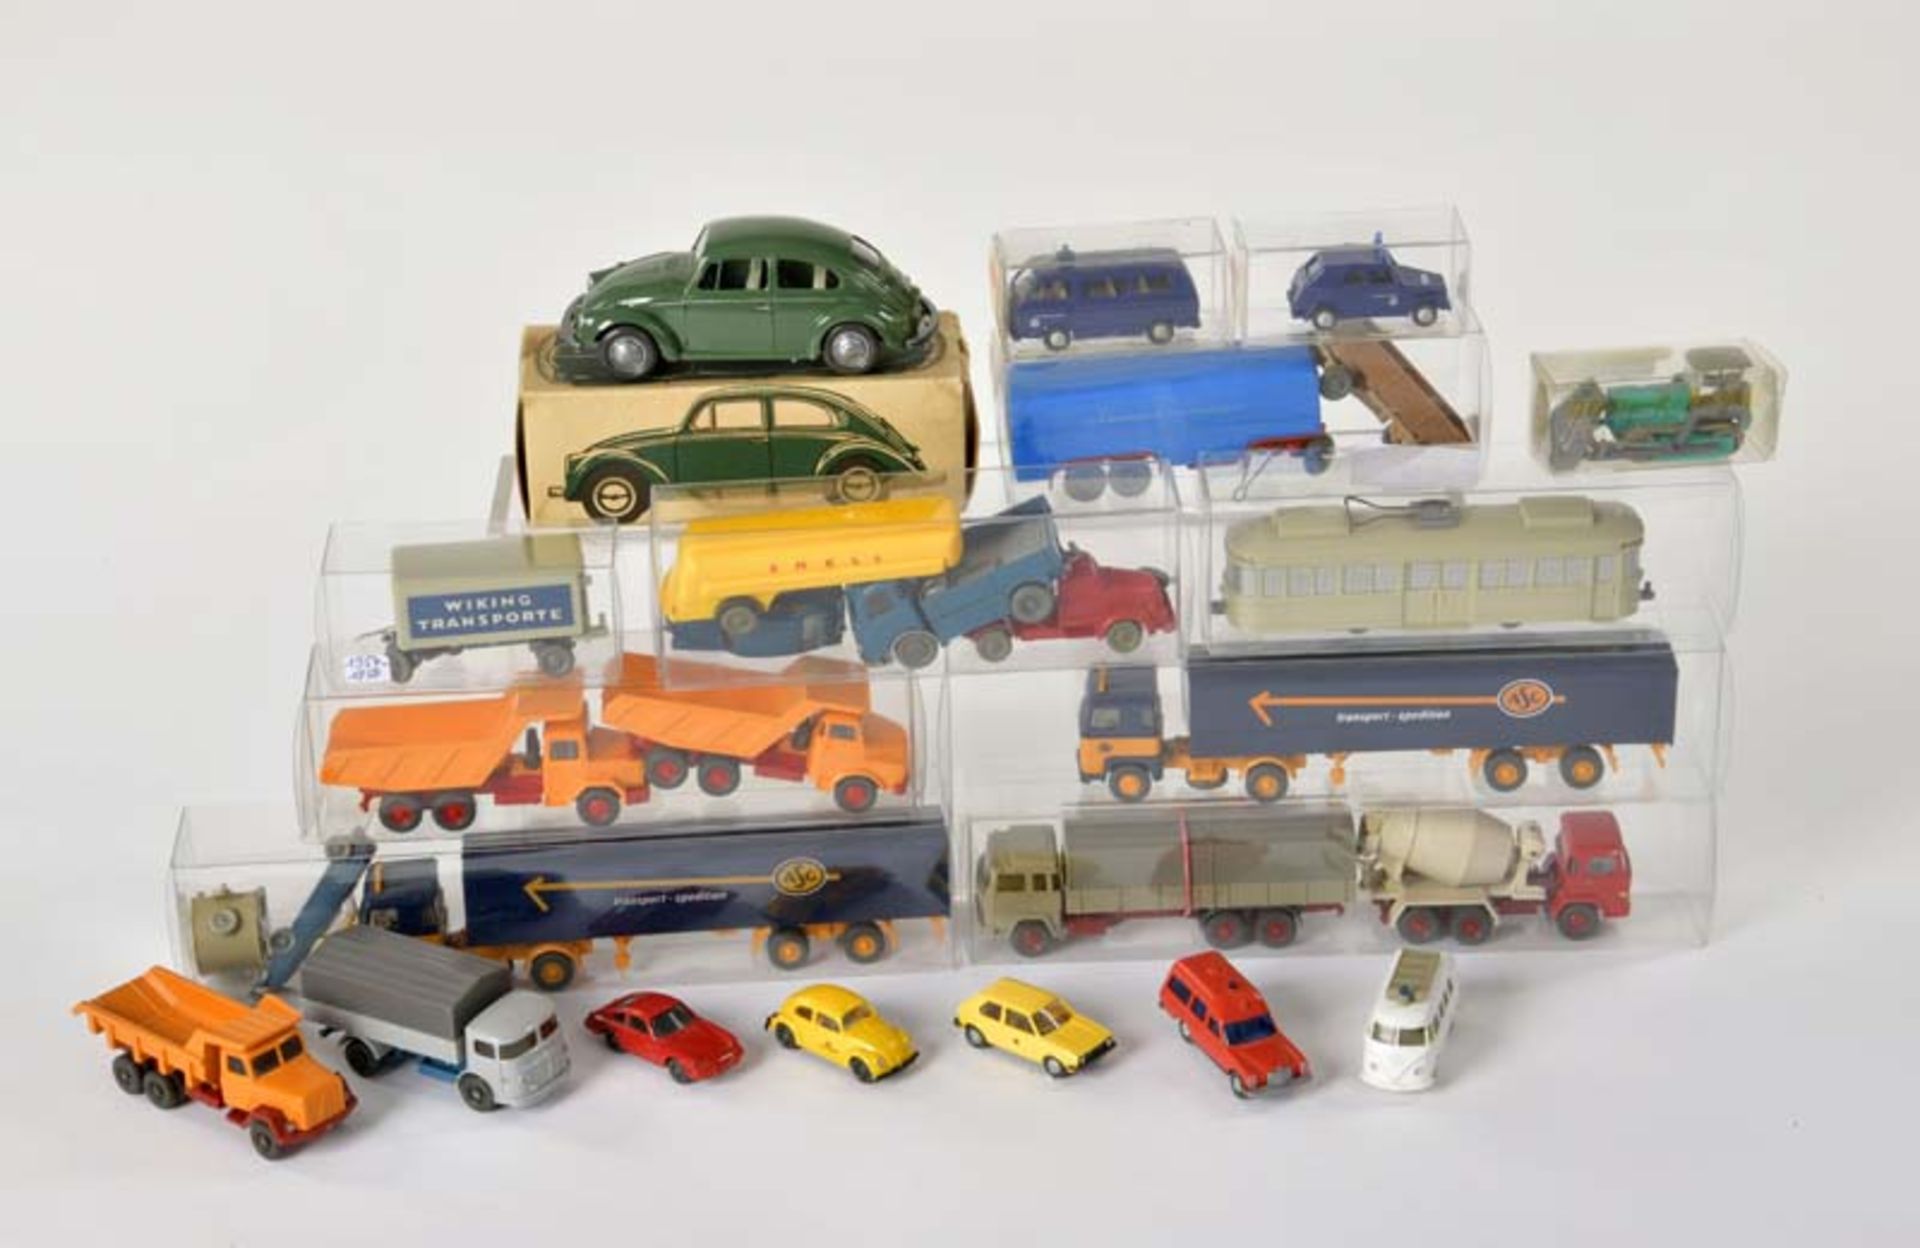 Wiking, Bundle Trucks, Cars a.o., W.-Germany, 1:87, 1x 1:40, plastic, mixed condition, please